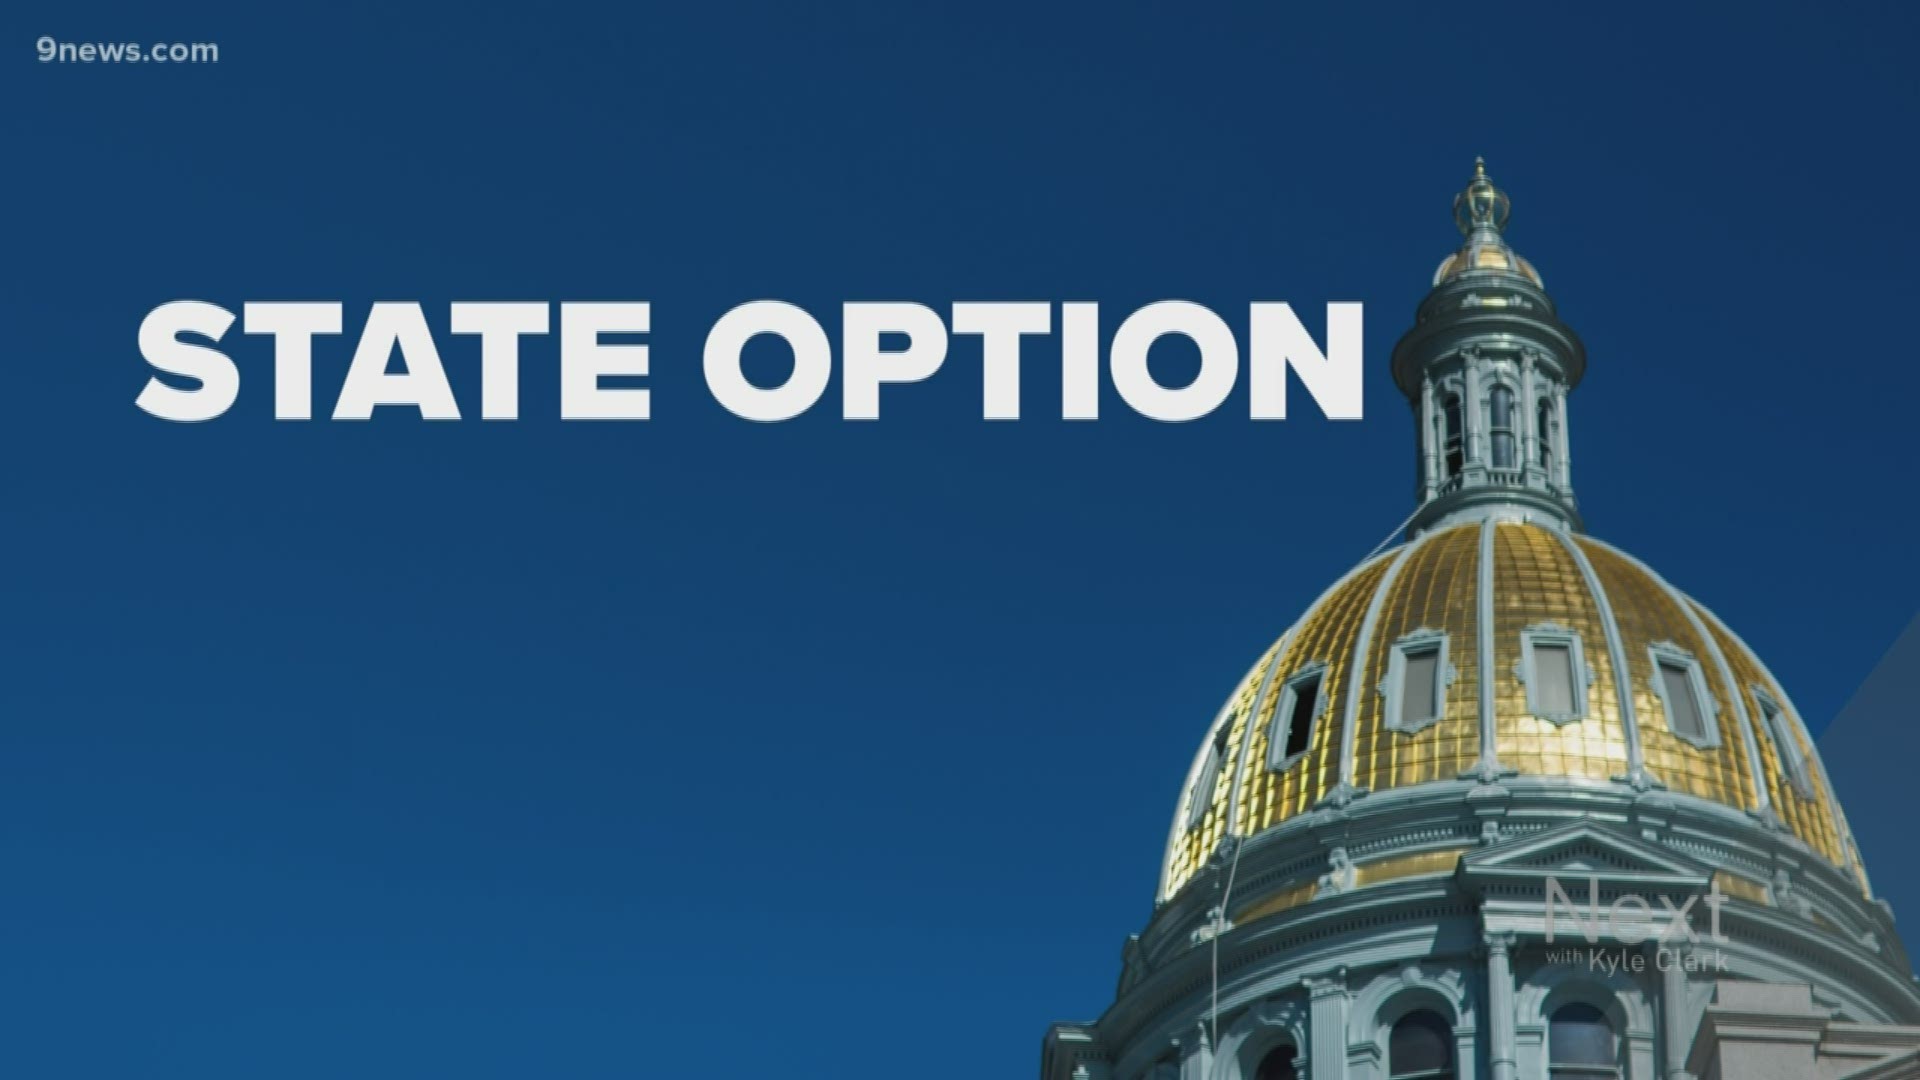 Colorado just unveiled its planned path to affordable healthcare, and people have about two weeks to give feedback on what is a complicated issue.